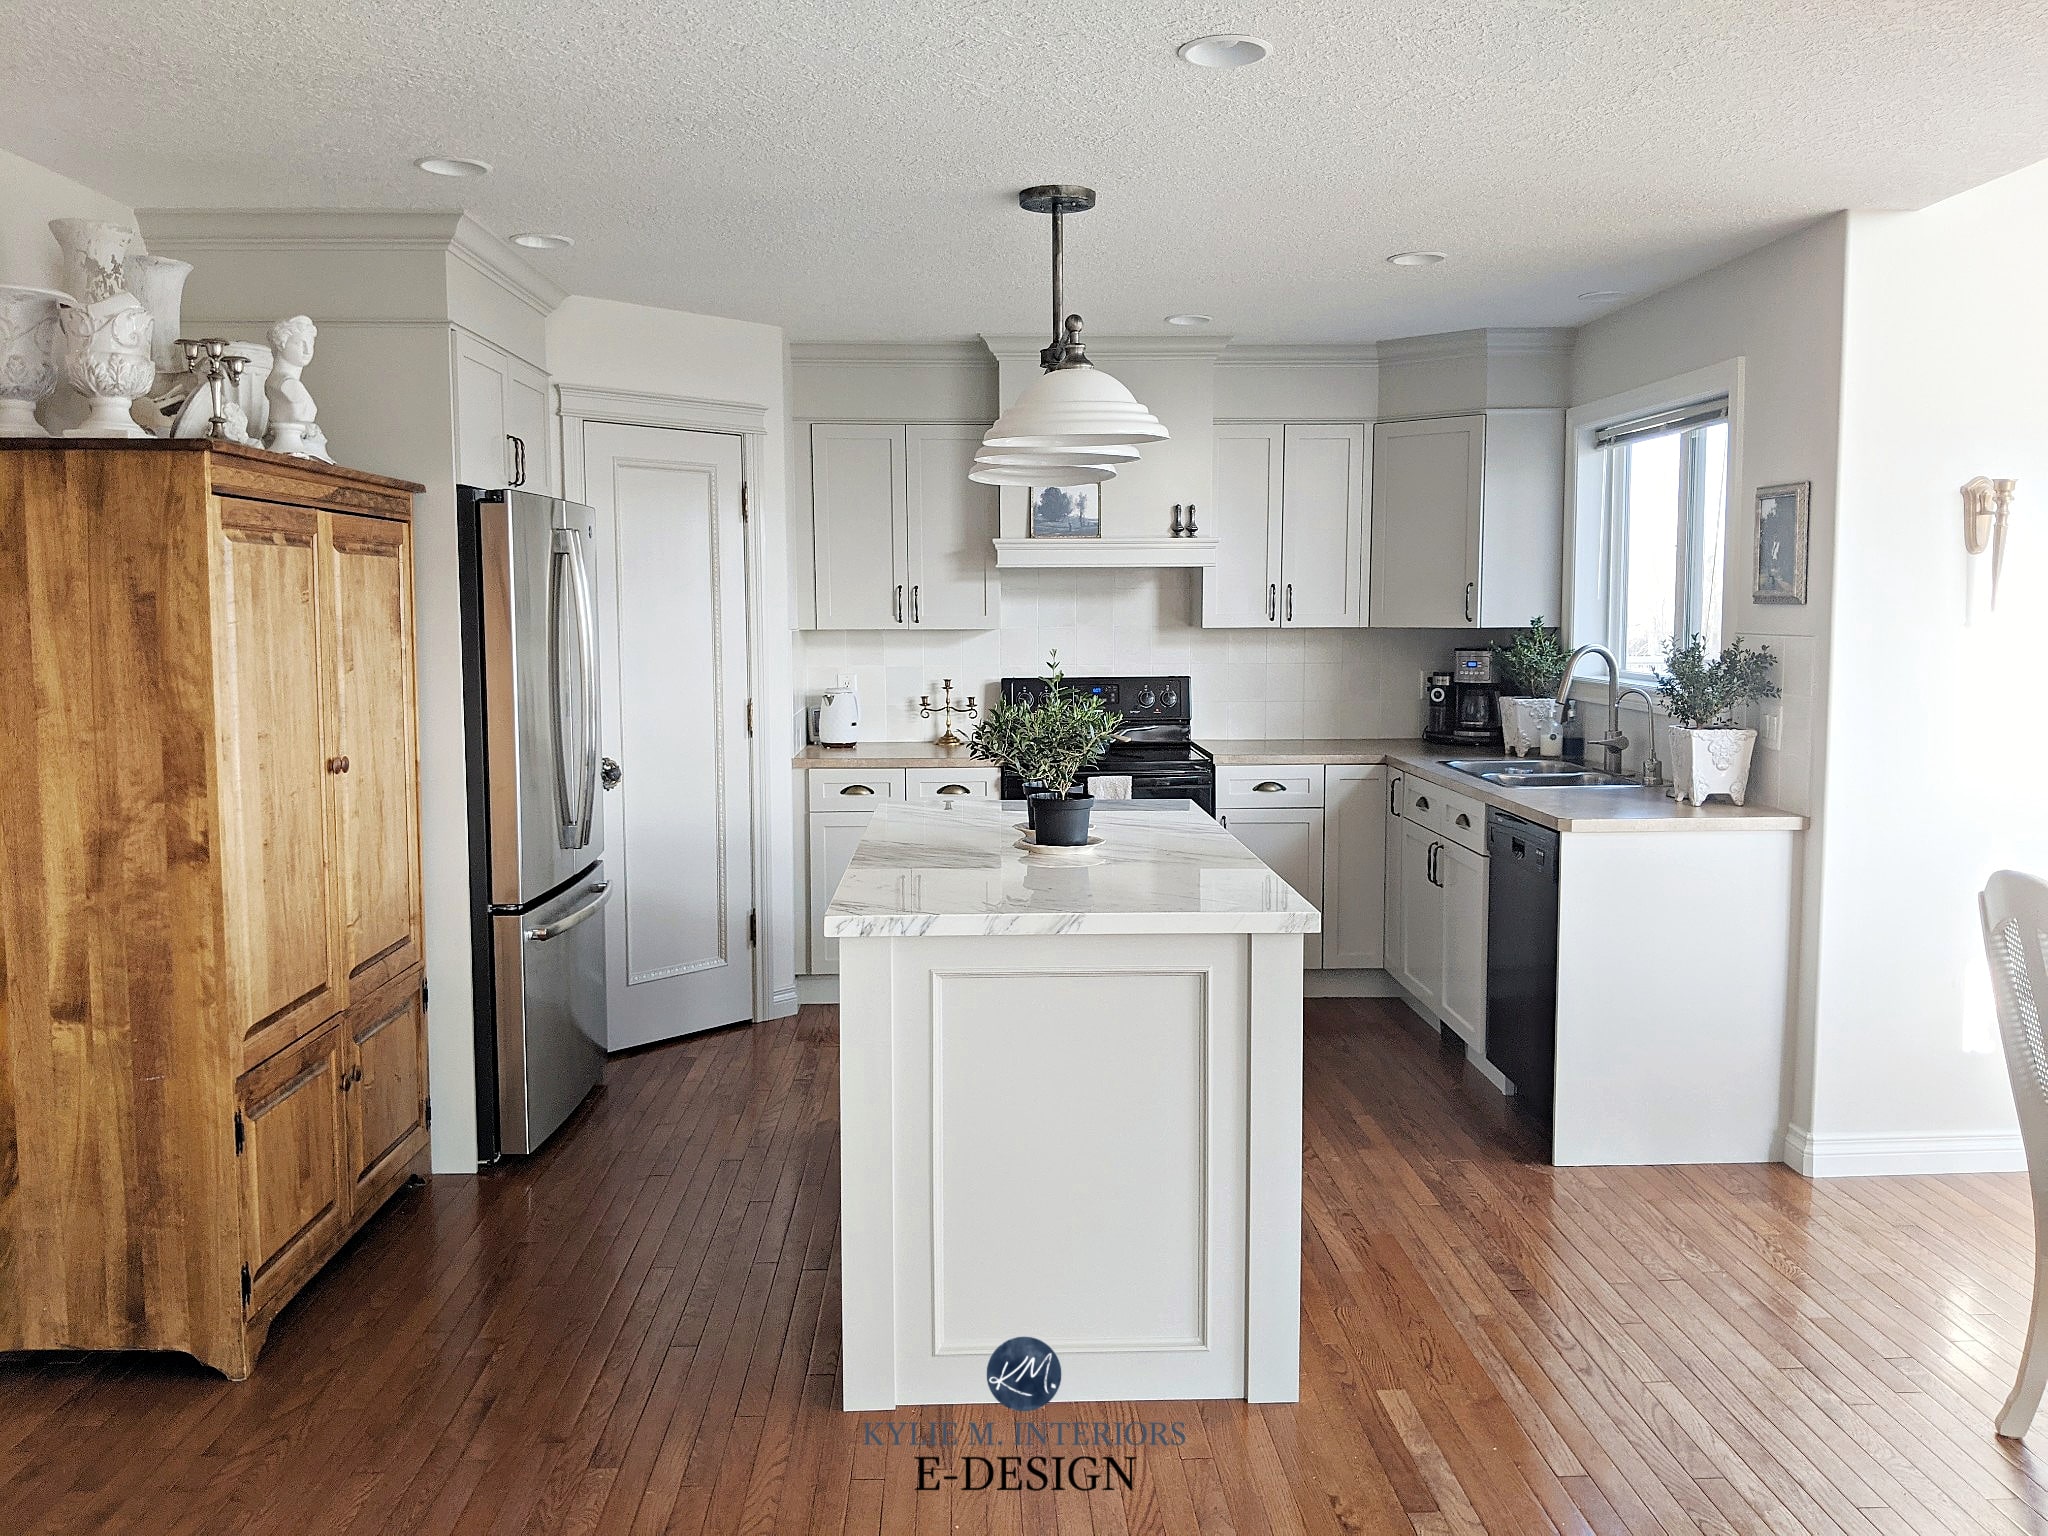 Gray greige painted kitchen maple cabinets. Marble island and beige laminate countertop. Kylie M Interiors Edesign, Benjamin Moore and Sherwin Agreeable Gray, Classic Gray